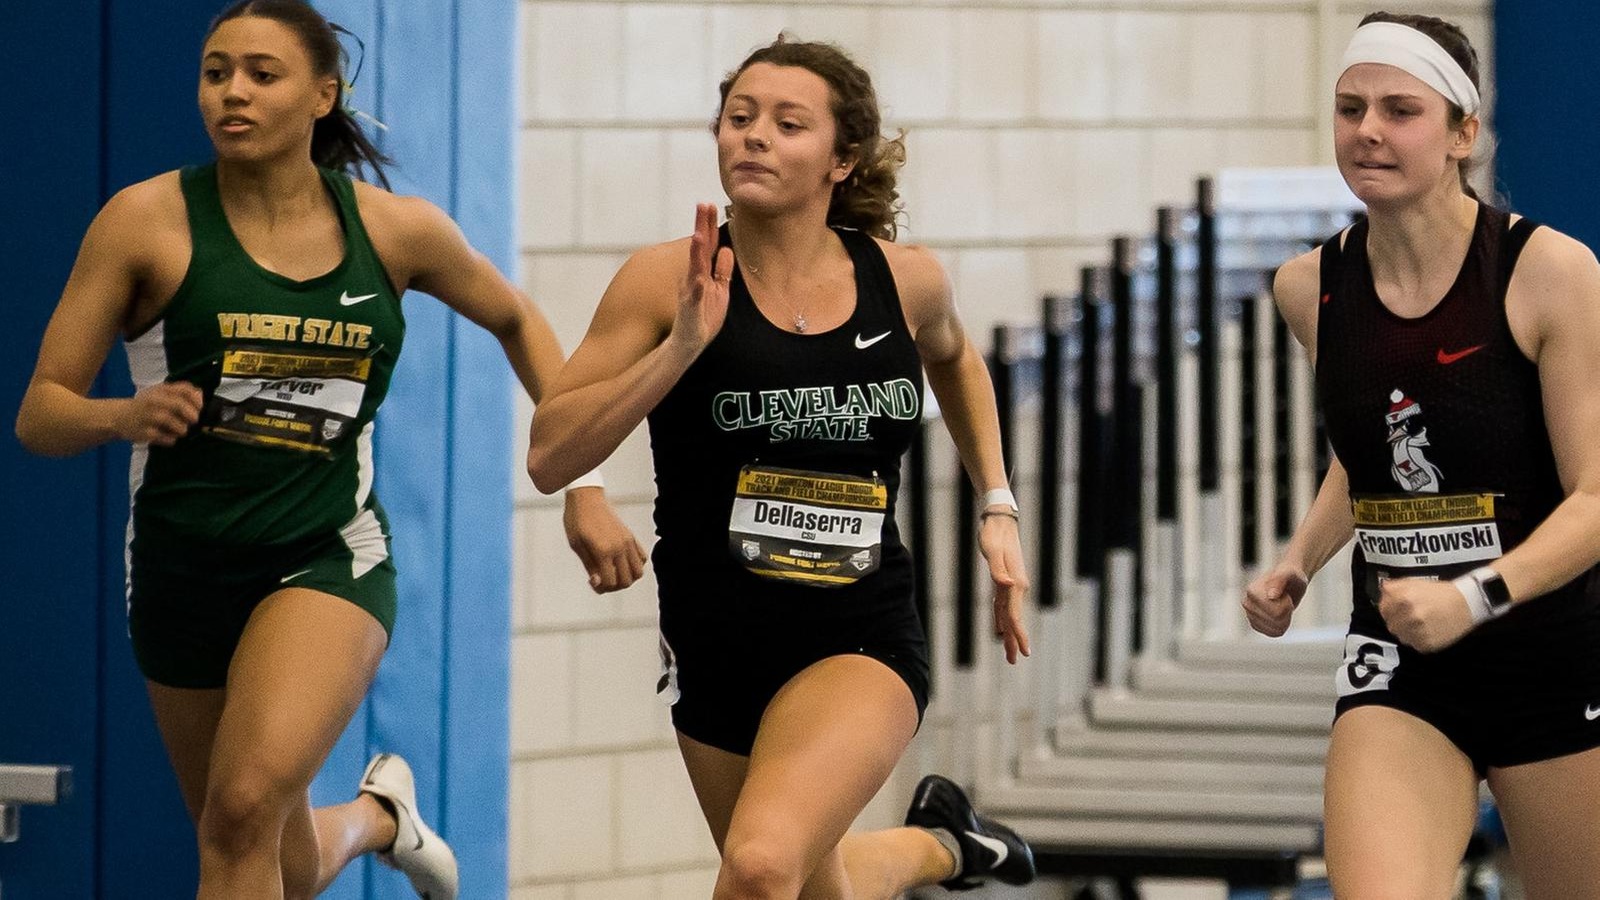 Vikings Continue Action At #HLTF Indoor Championship